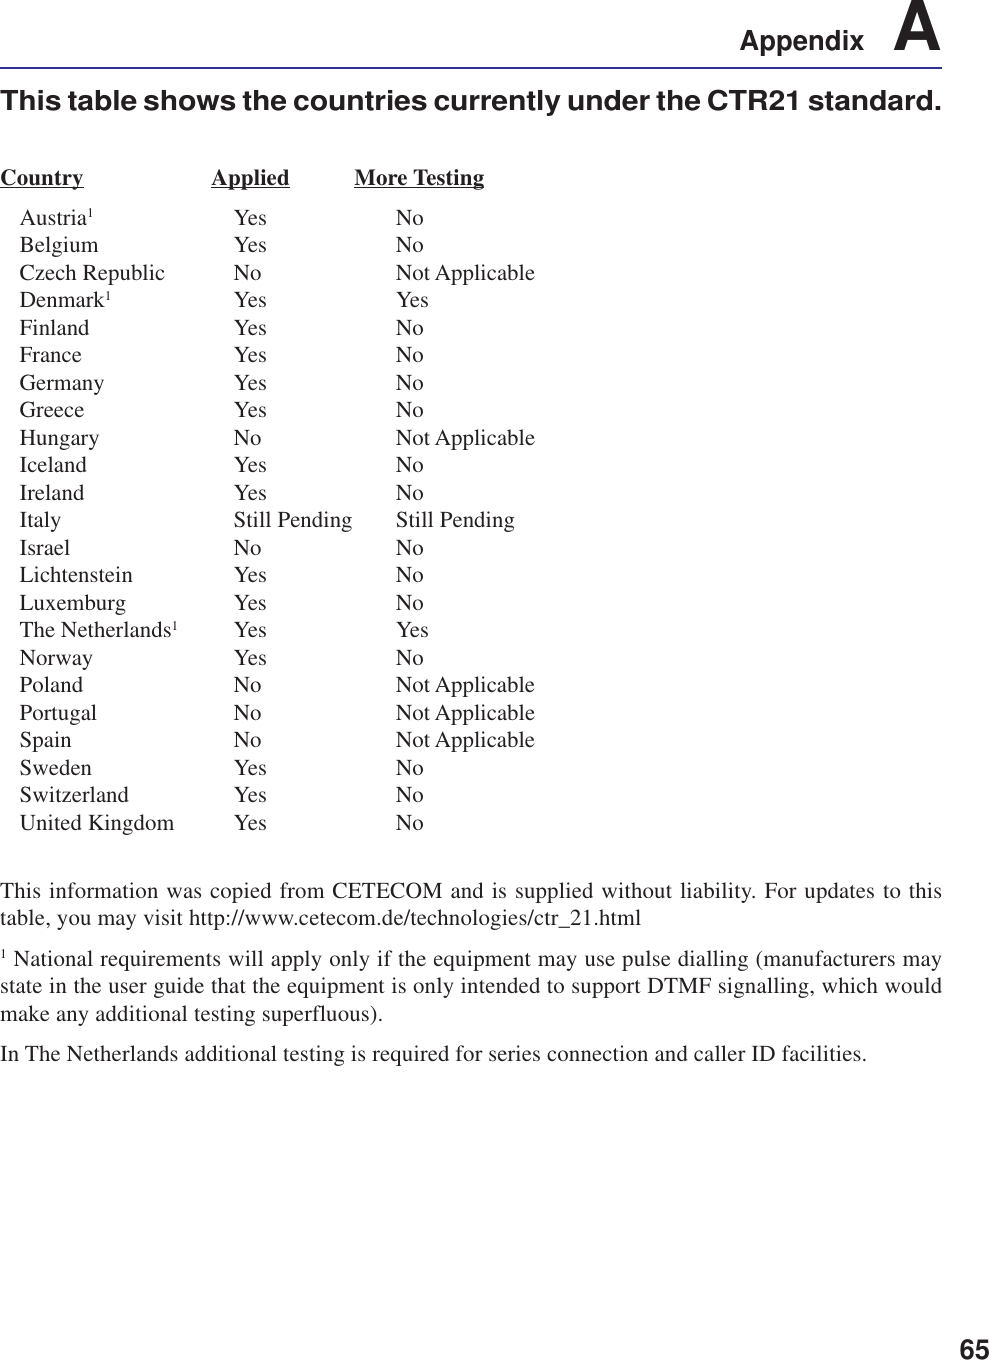 65Appendix    AThis table shows the countries currently under the CTR21 standard.Country     Applied More TestingAustria1Yes NoBelgium Yes NoCzech Republic No Not ApplicableDenmark1Yes YesFinland Yes NoFrance Yes NoGermany Yes NoGreece Yes NoHungary No Not ApplicableIceland Yes NoIreland Yes NoItaly Still Pending Still PendingIsrael No NoLichtenstein Yes NoLuxemburg Yes NoThe Netherlands1Yes YesNorway Yes NoPoland No Not ApplicablePortugal No Not ApplicableSpain No Not ApplicableSweden Yes NoSwitzerland Yes NoUnited Kingdom Yes NoThis information was copied from CETECOM and is supplied without liability. For updates to thistable, you may visit http://www.cetecom.de/technologies/ctr_21.html1 National requirements will apply only if the equipment may use pulse dialling (manufacturers maystate in the user guide that the equipment is only intended to support DTMF signalling, which wouldmake any additional testing superfluous).In The Netherlands additional testing is required for series connection and caller ID facilities.